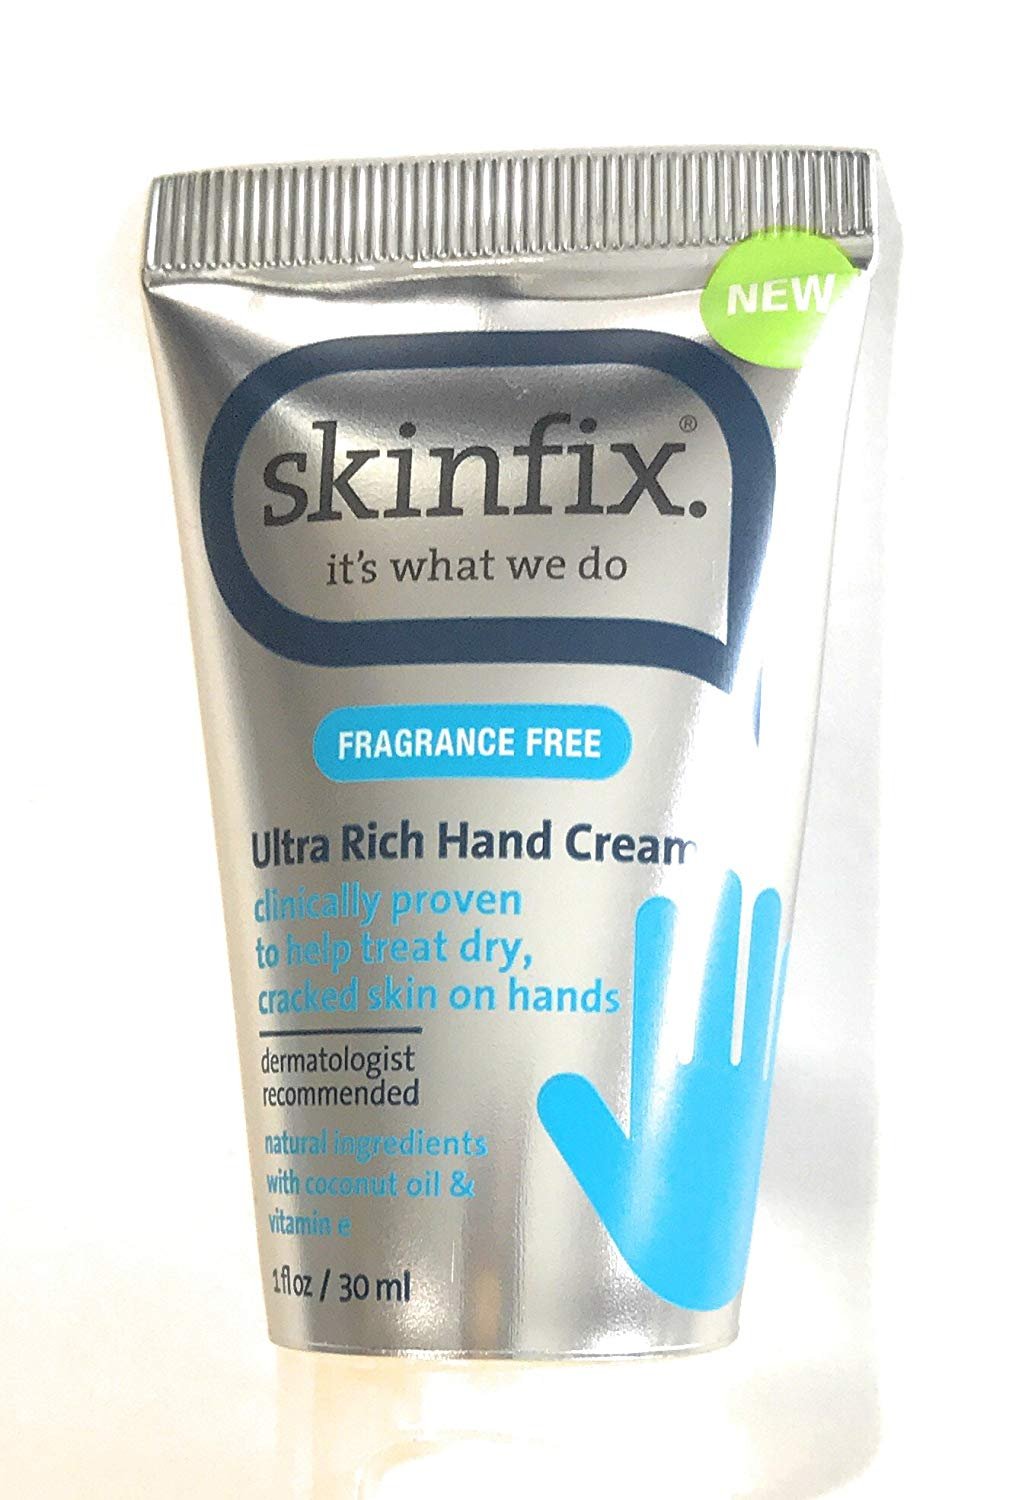 Skinfix Ultra Rich Hand Cream, Travel Size, 1 Oz - image 2 of 2